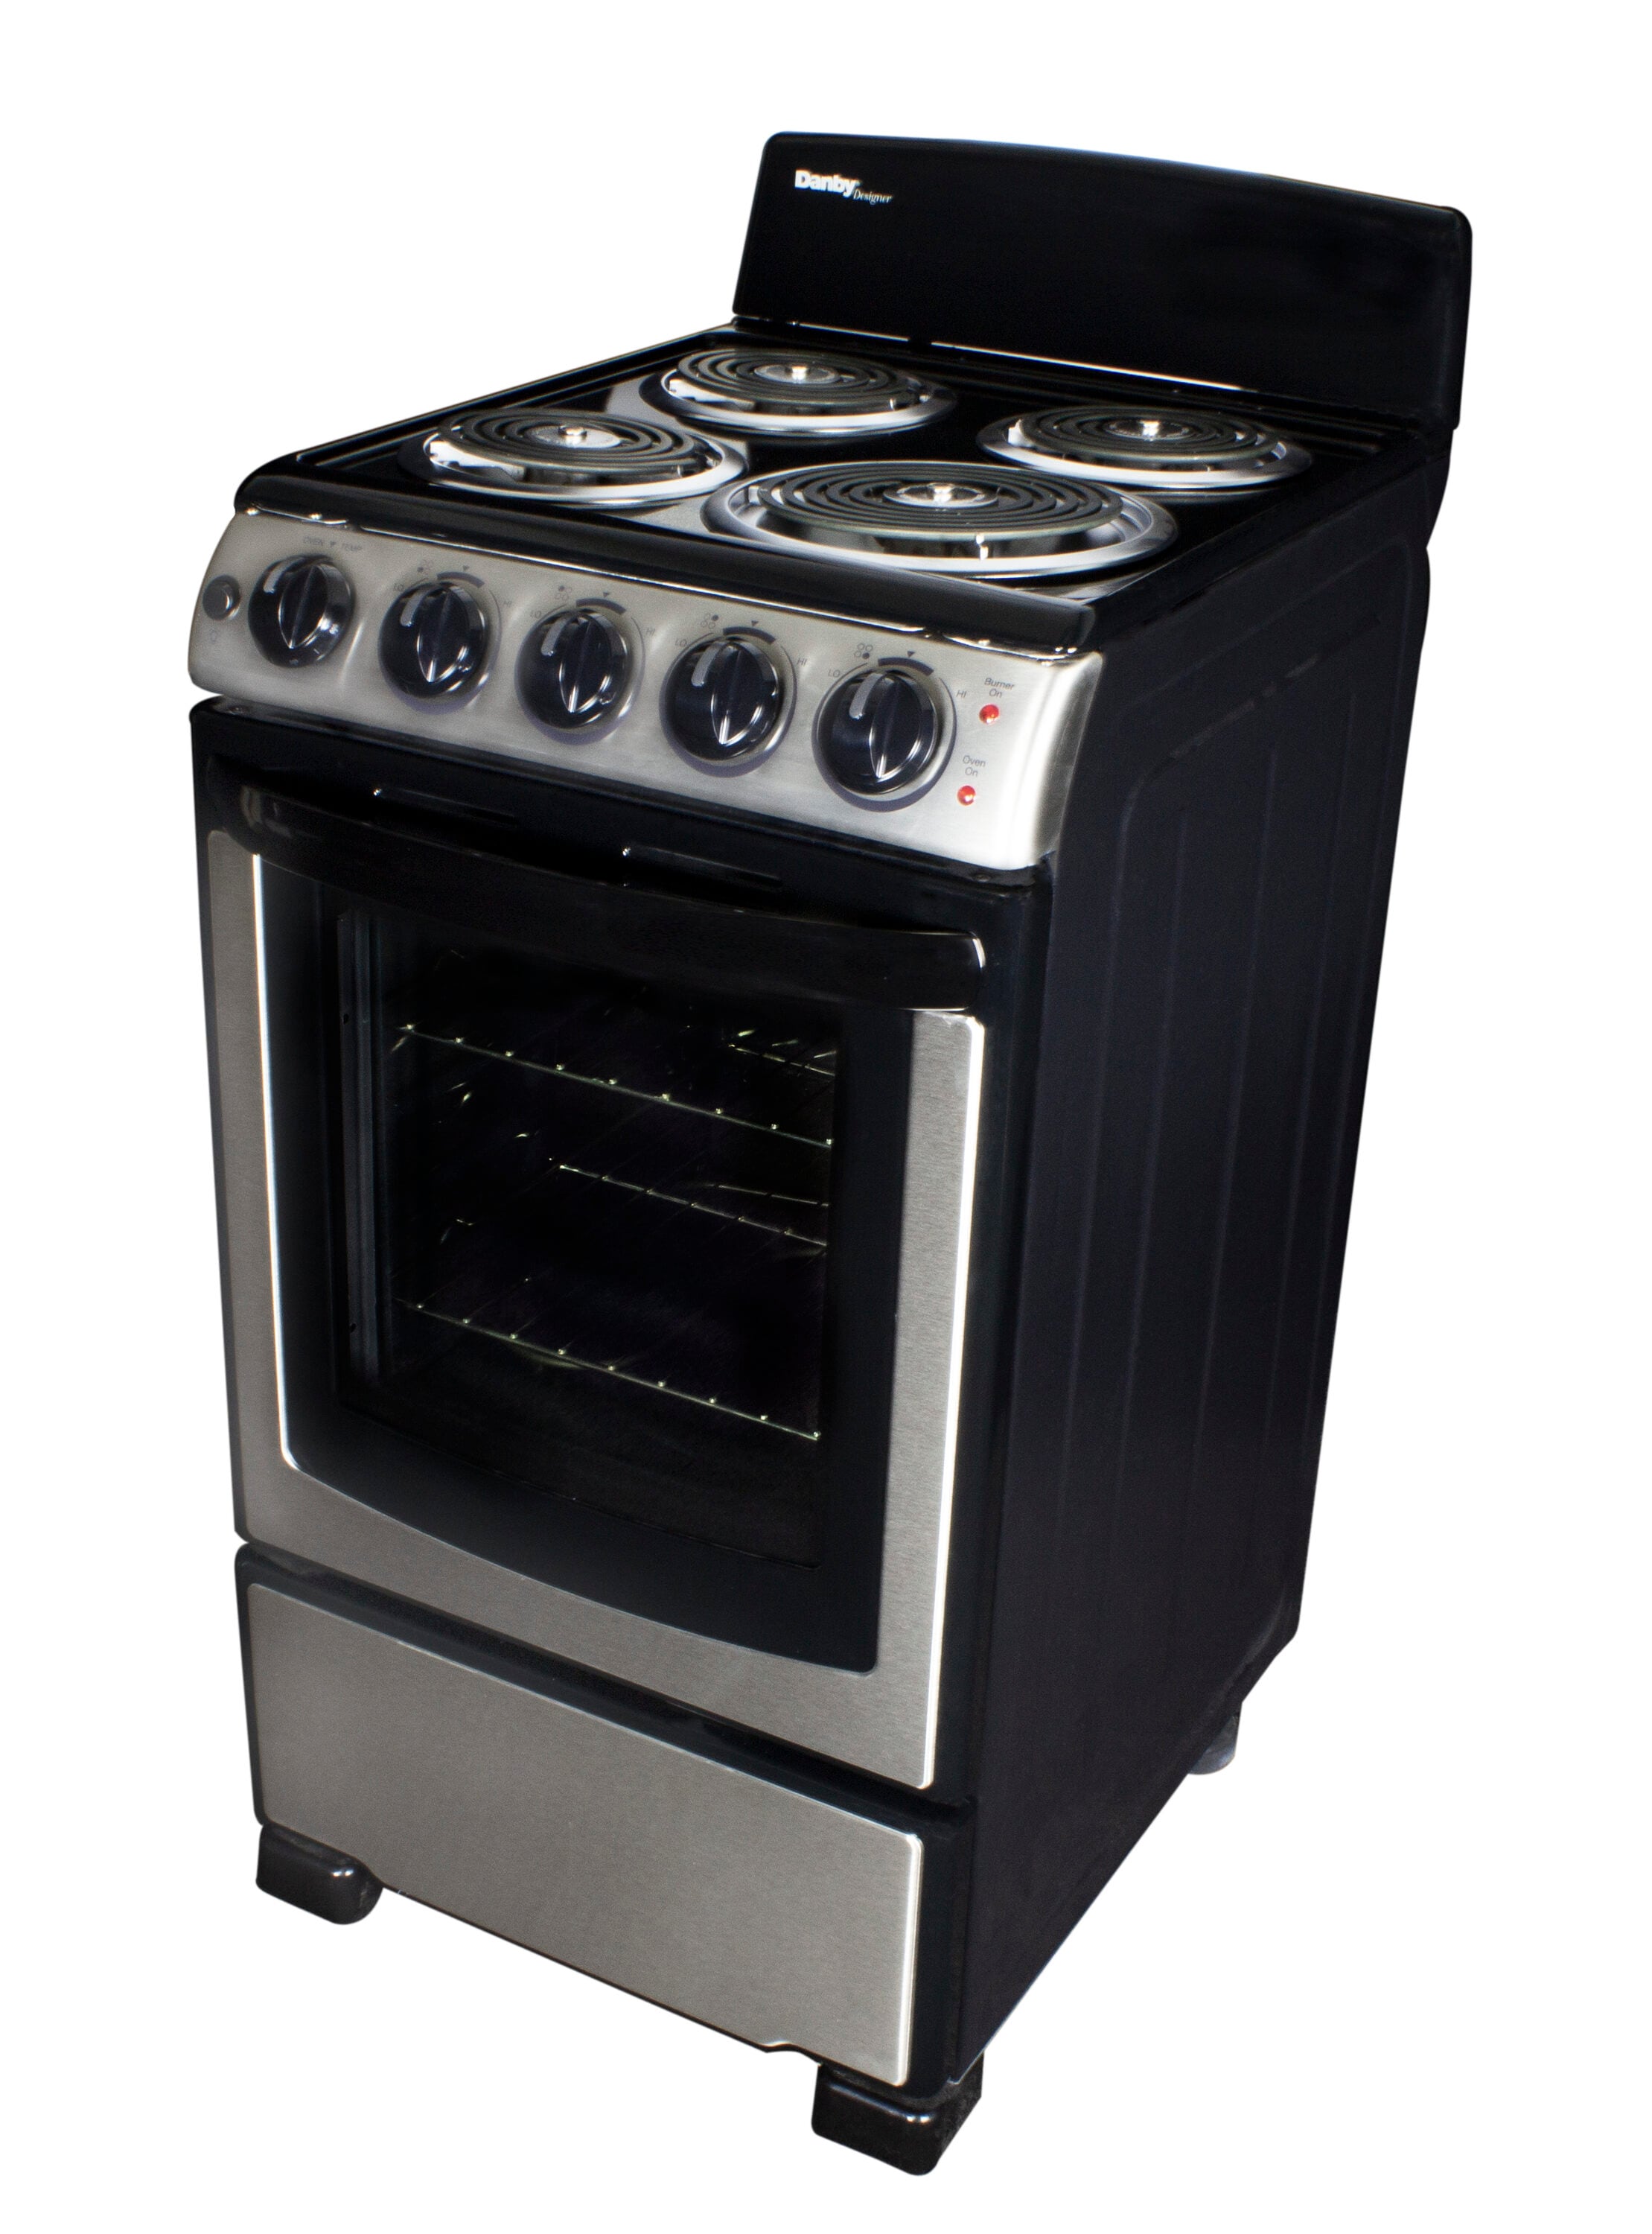 20 Electric Range for sale